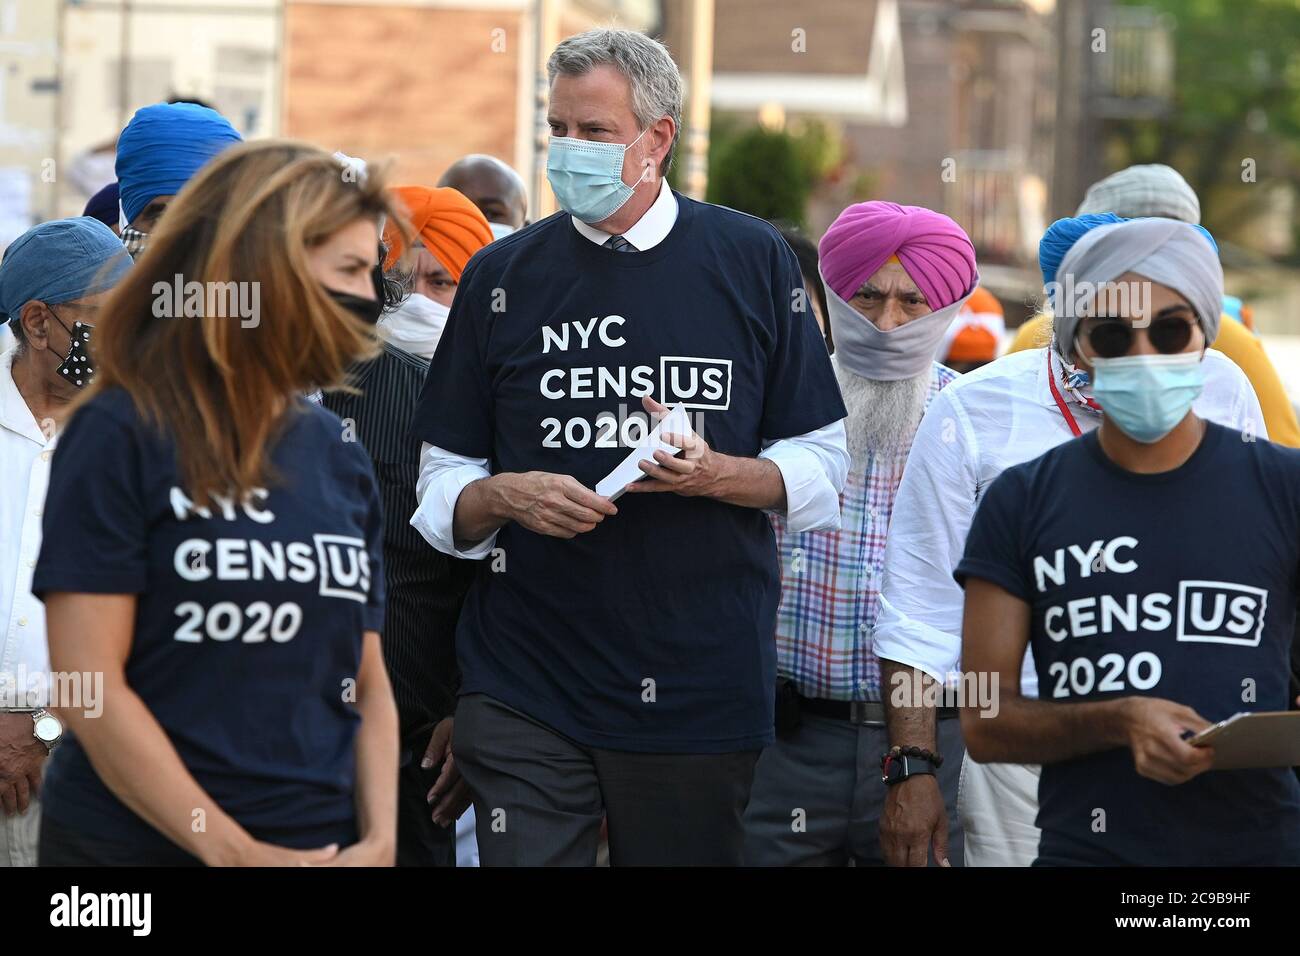 New York City, USA. 29th July, 2020. New York City Mayor Bill de Blasio (c) and NYC Census 20202 Director Julie Menin (l) walk through the Richmond Hill Indian Punjabi community as they go door-knocking to encourage New Yorkers to complete the 2020 census, in Queens, NY, July 29, 2020. (Anthony Behar/Sipa USA) Credit: Sipa USA/Alamy Live News Stock Photo